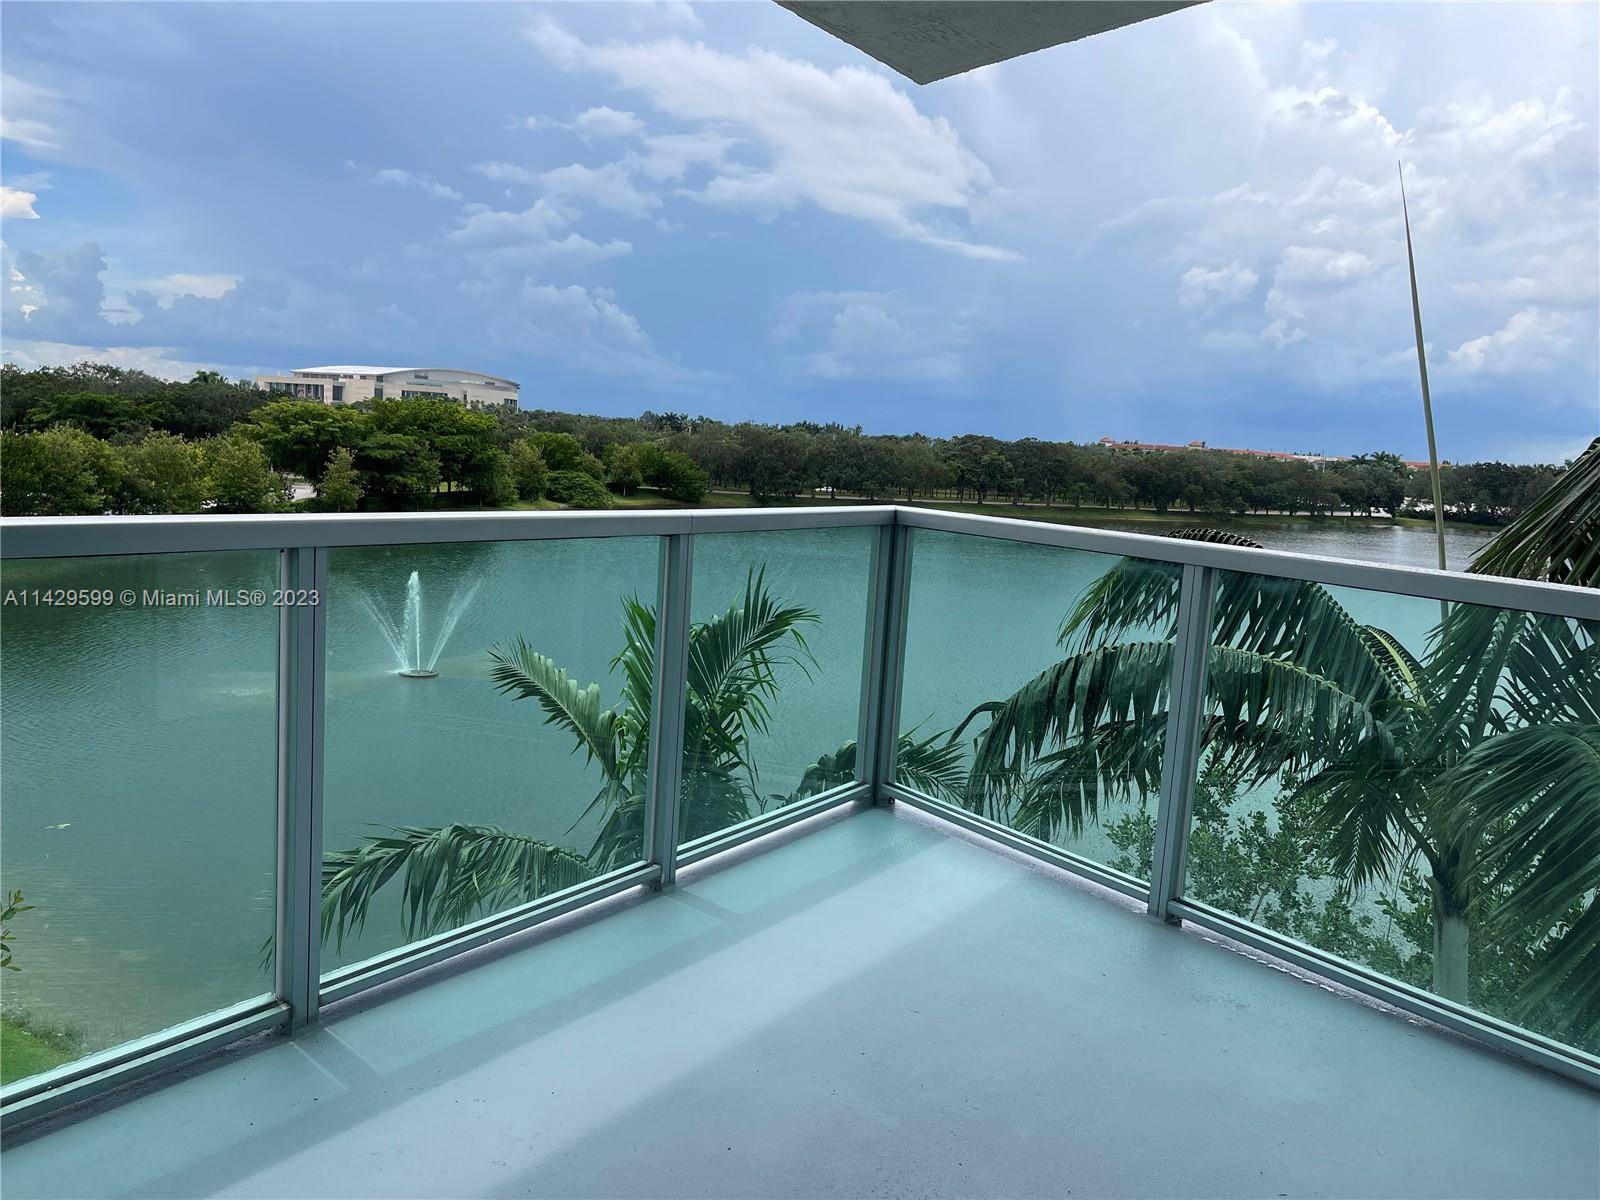 Spectacular unit at Tao Sawgrass 3 beds 3 full baths, amazing water views from the living room and master bedroom, apartment all remodeled, painted and ready to move in.